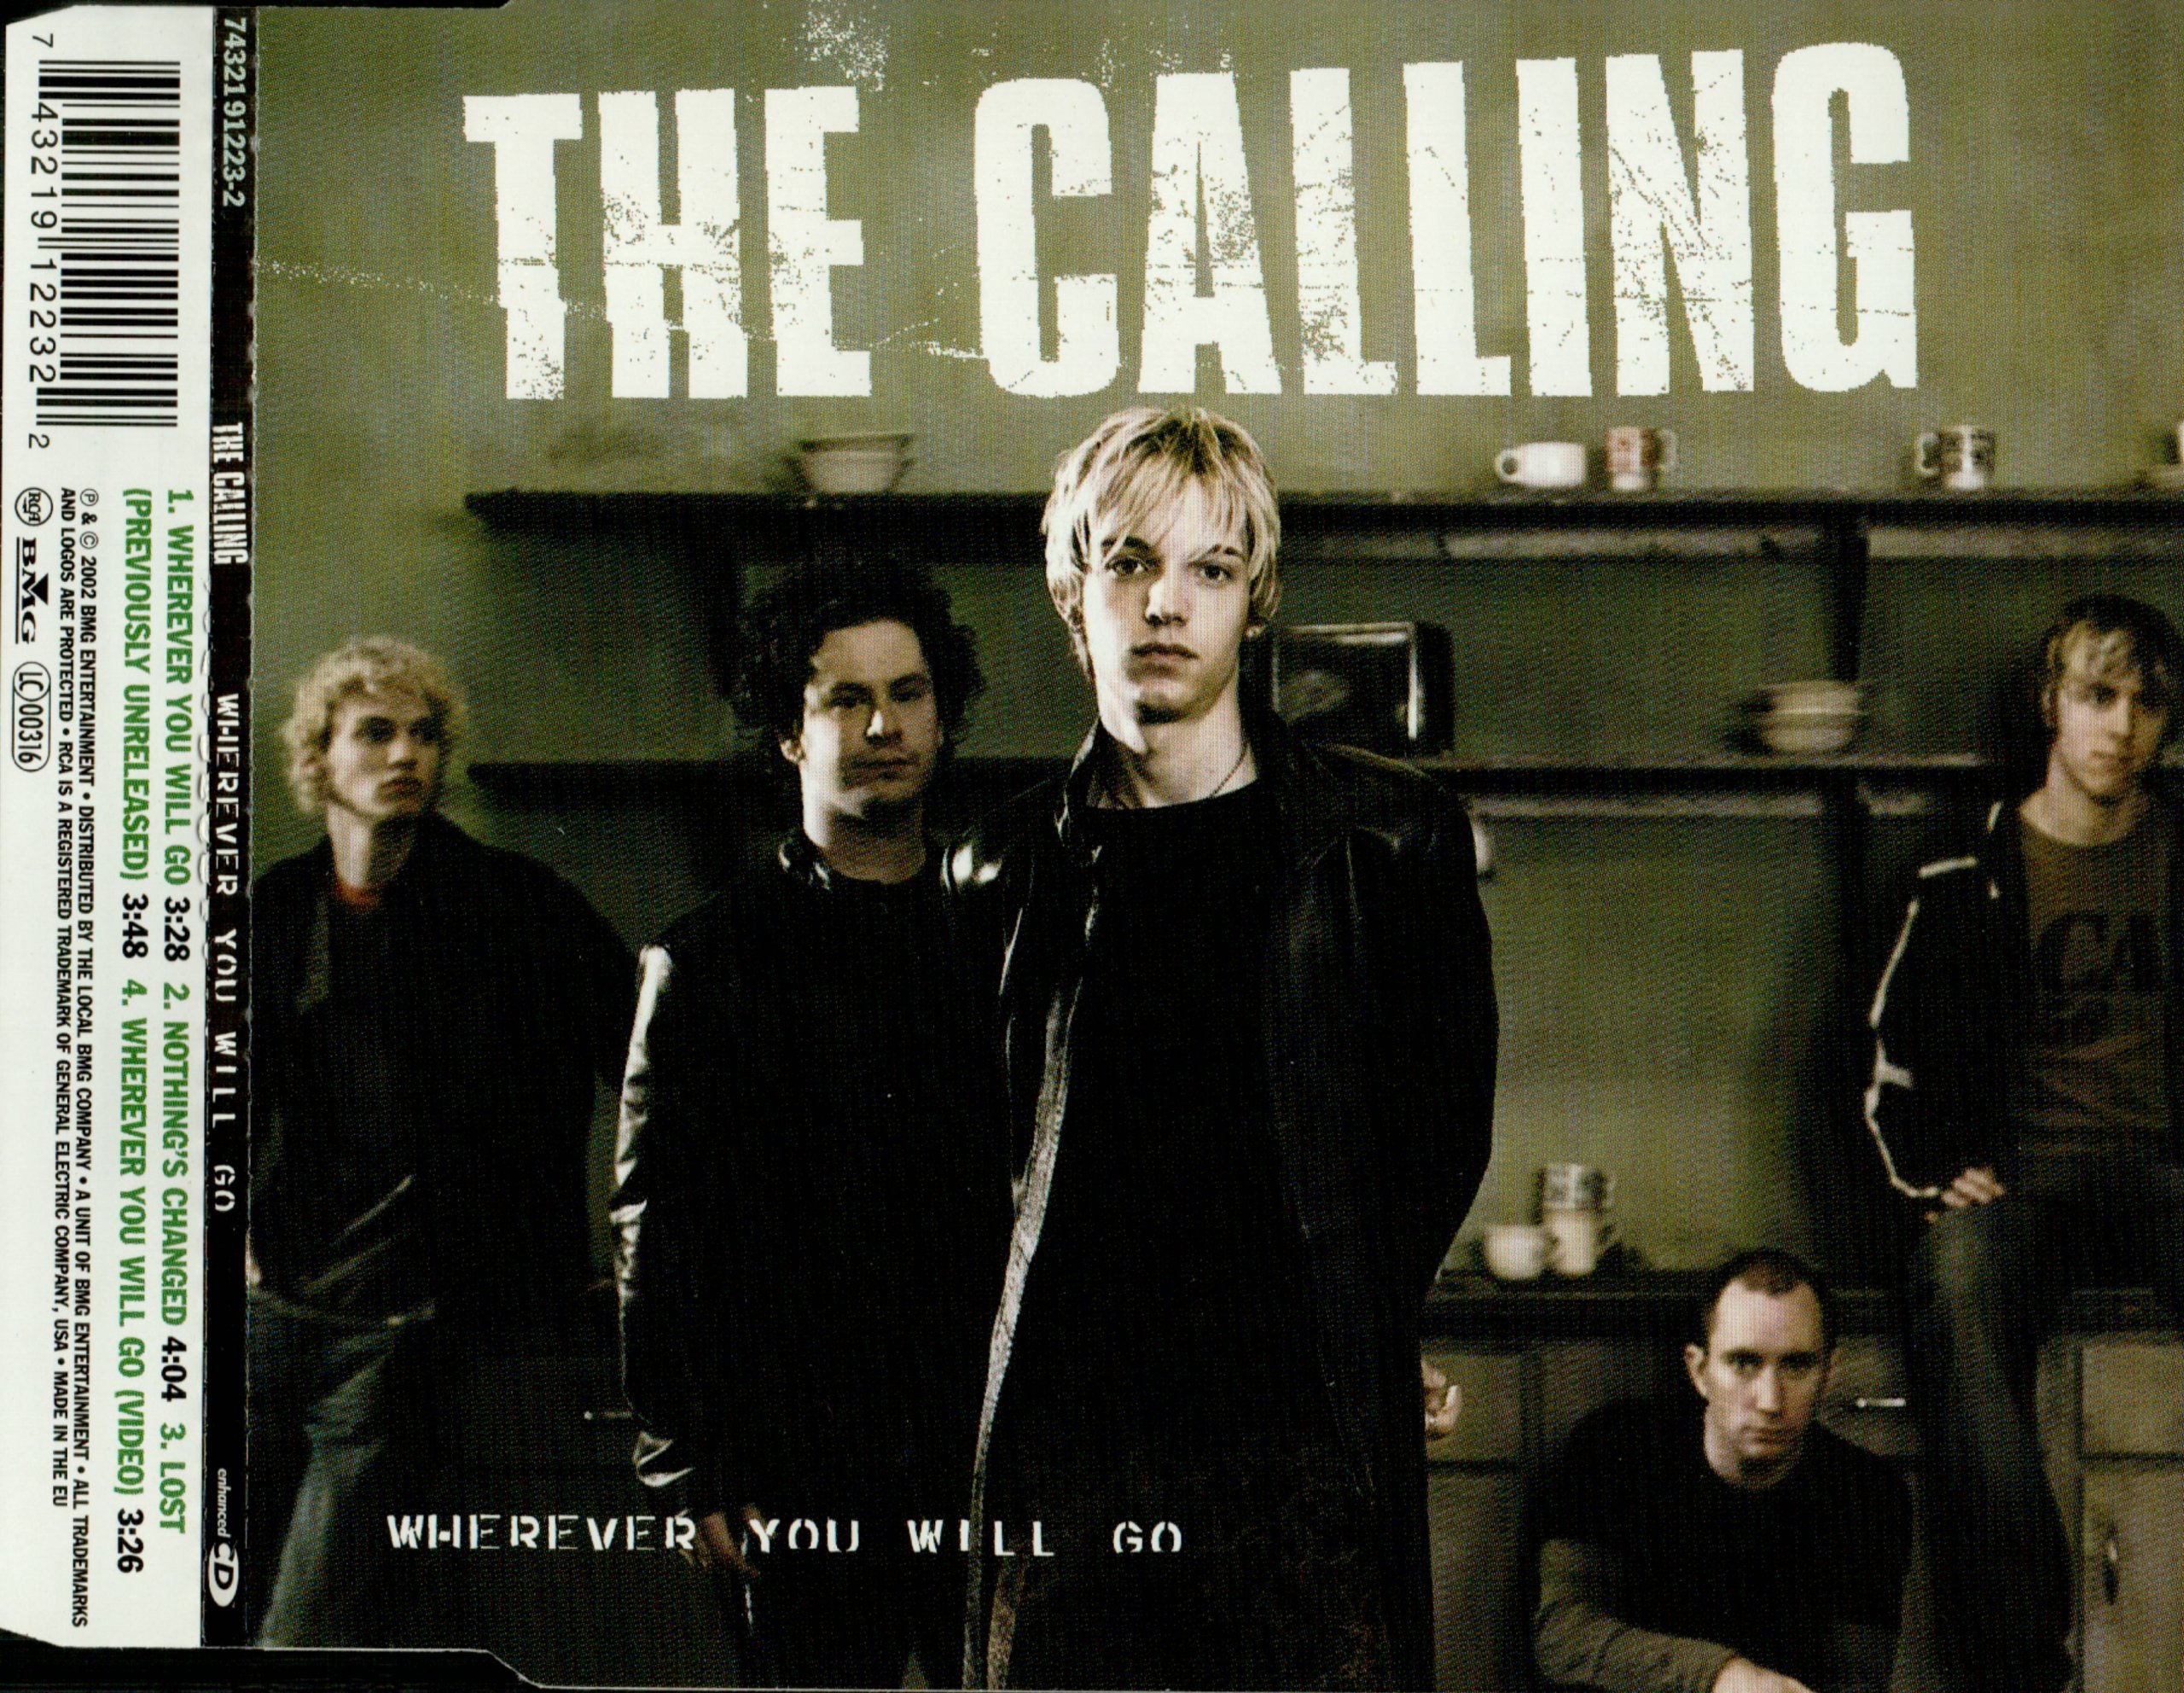 The calling thank you. The calling группа. The calling группа сейчас. The calling солист. The calling wherever you will go.